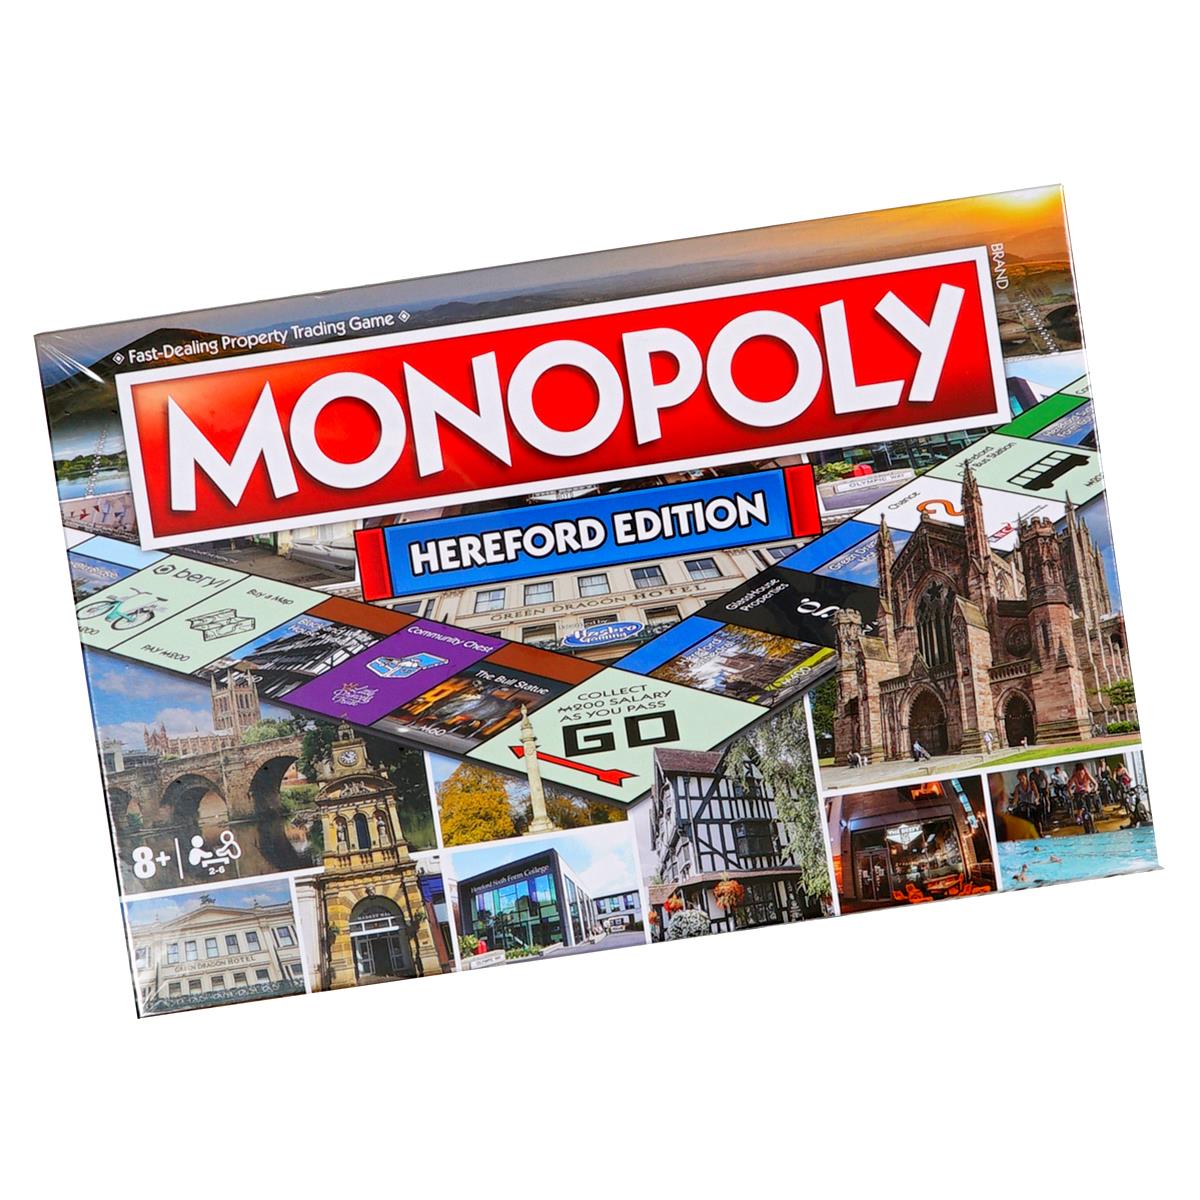 In the Hereford Monopoly game, which team calls this place their home?